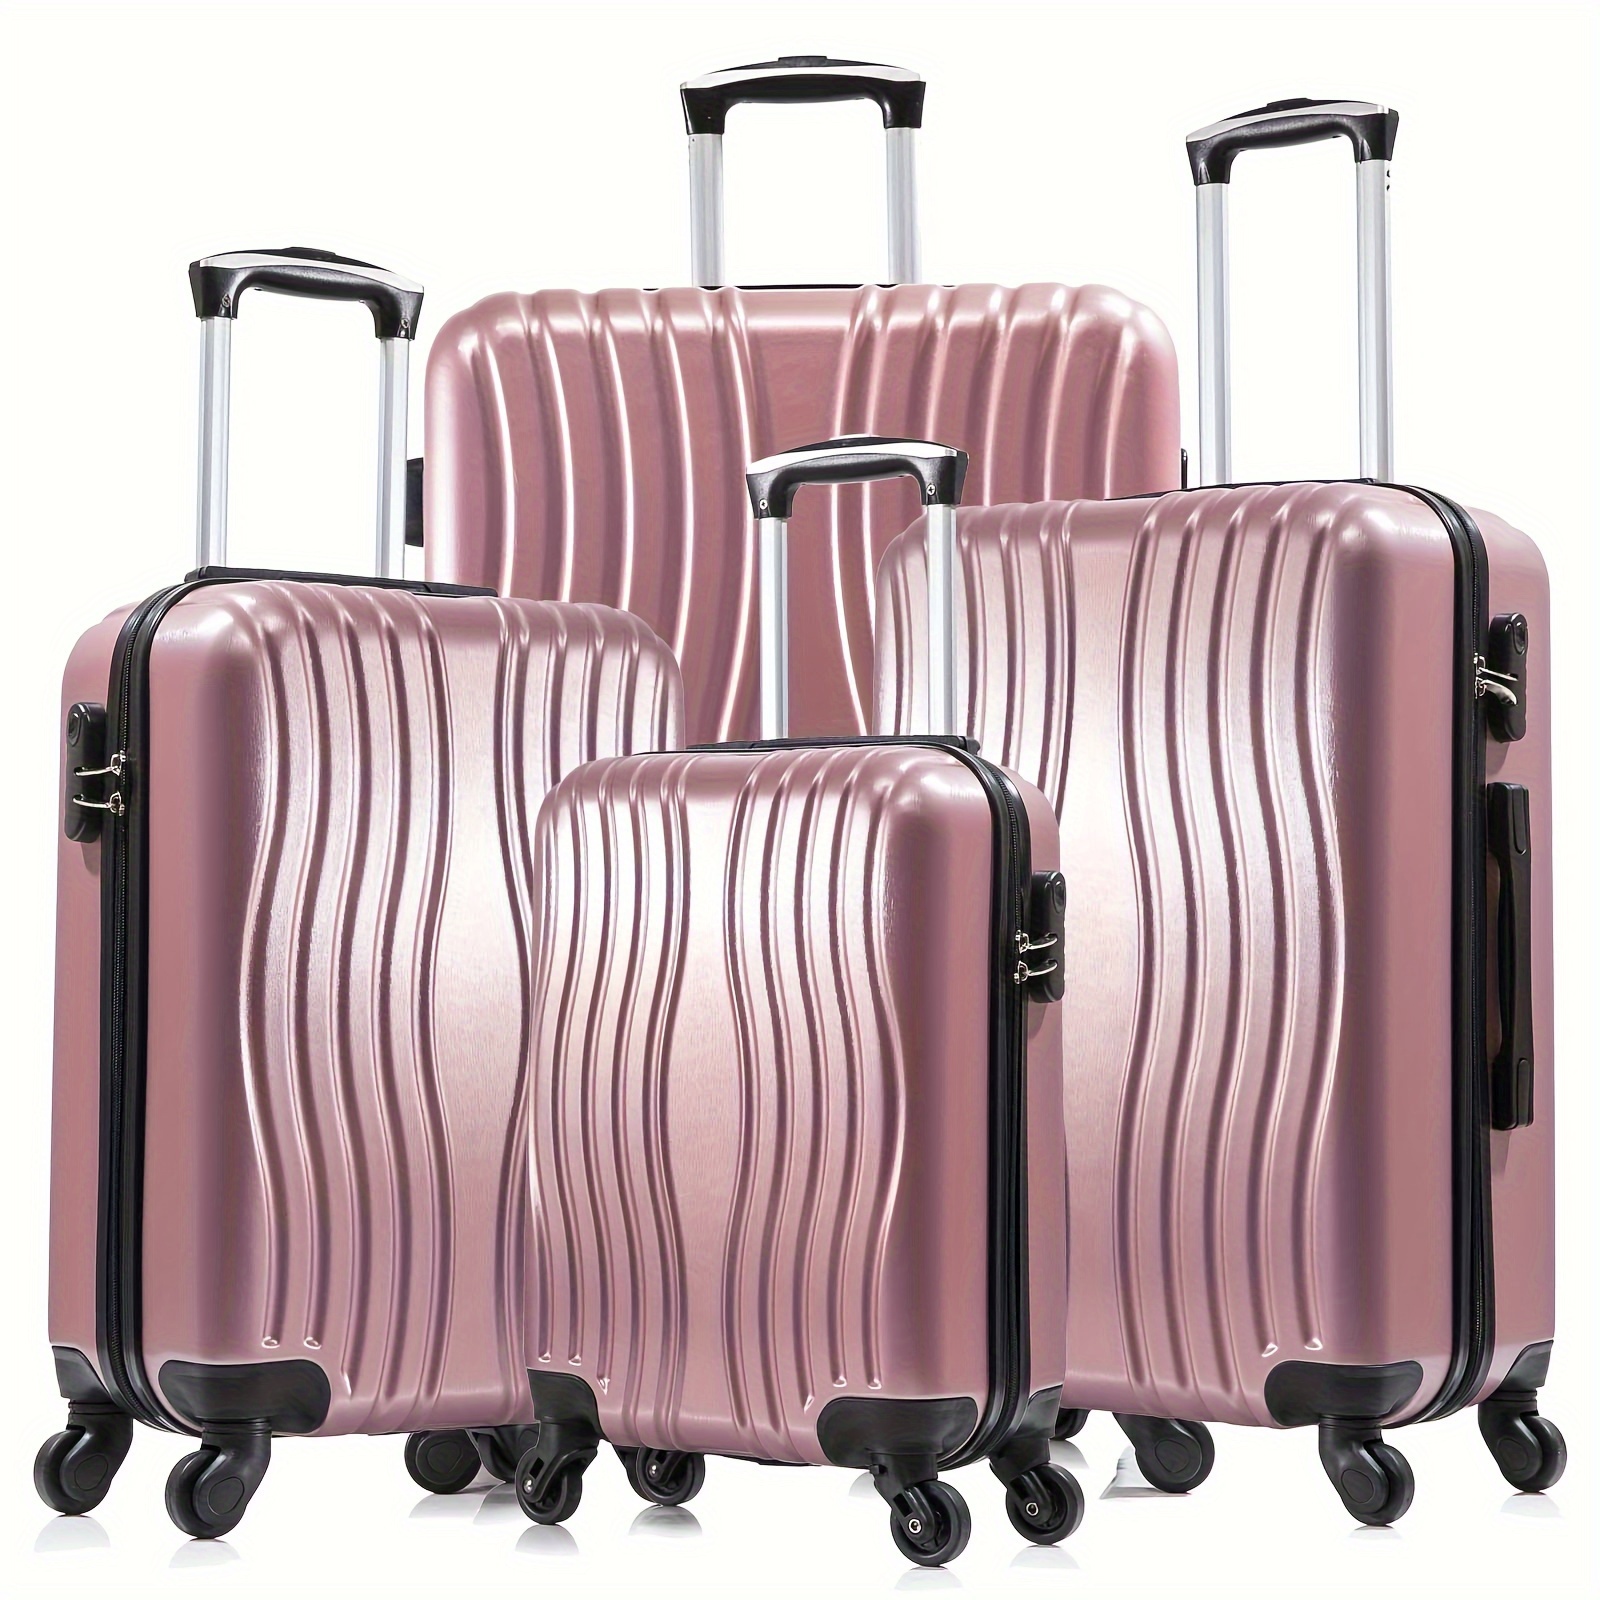 

4pc Luggage Sets Pc Material Hardshell Luggage Set Lightweight Hard Shell Travel W/spinner Wheels 18-28inch